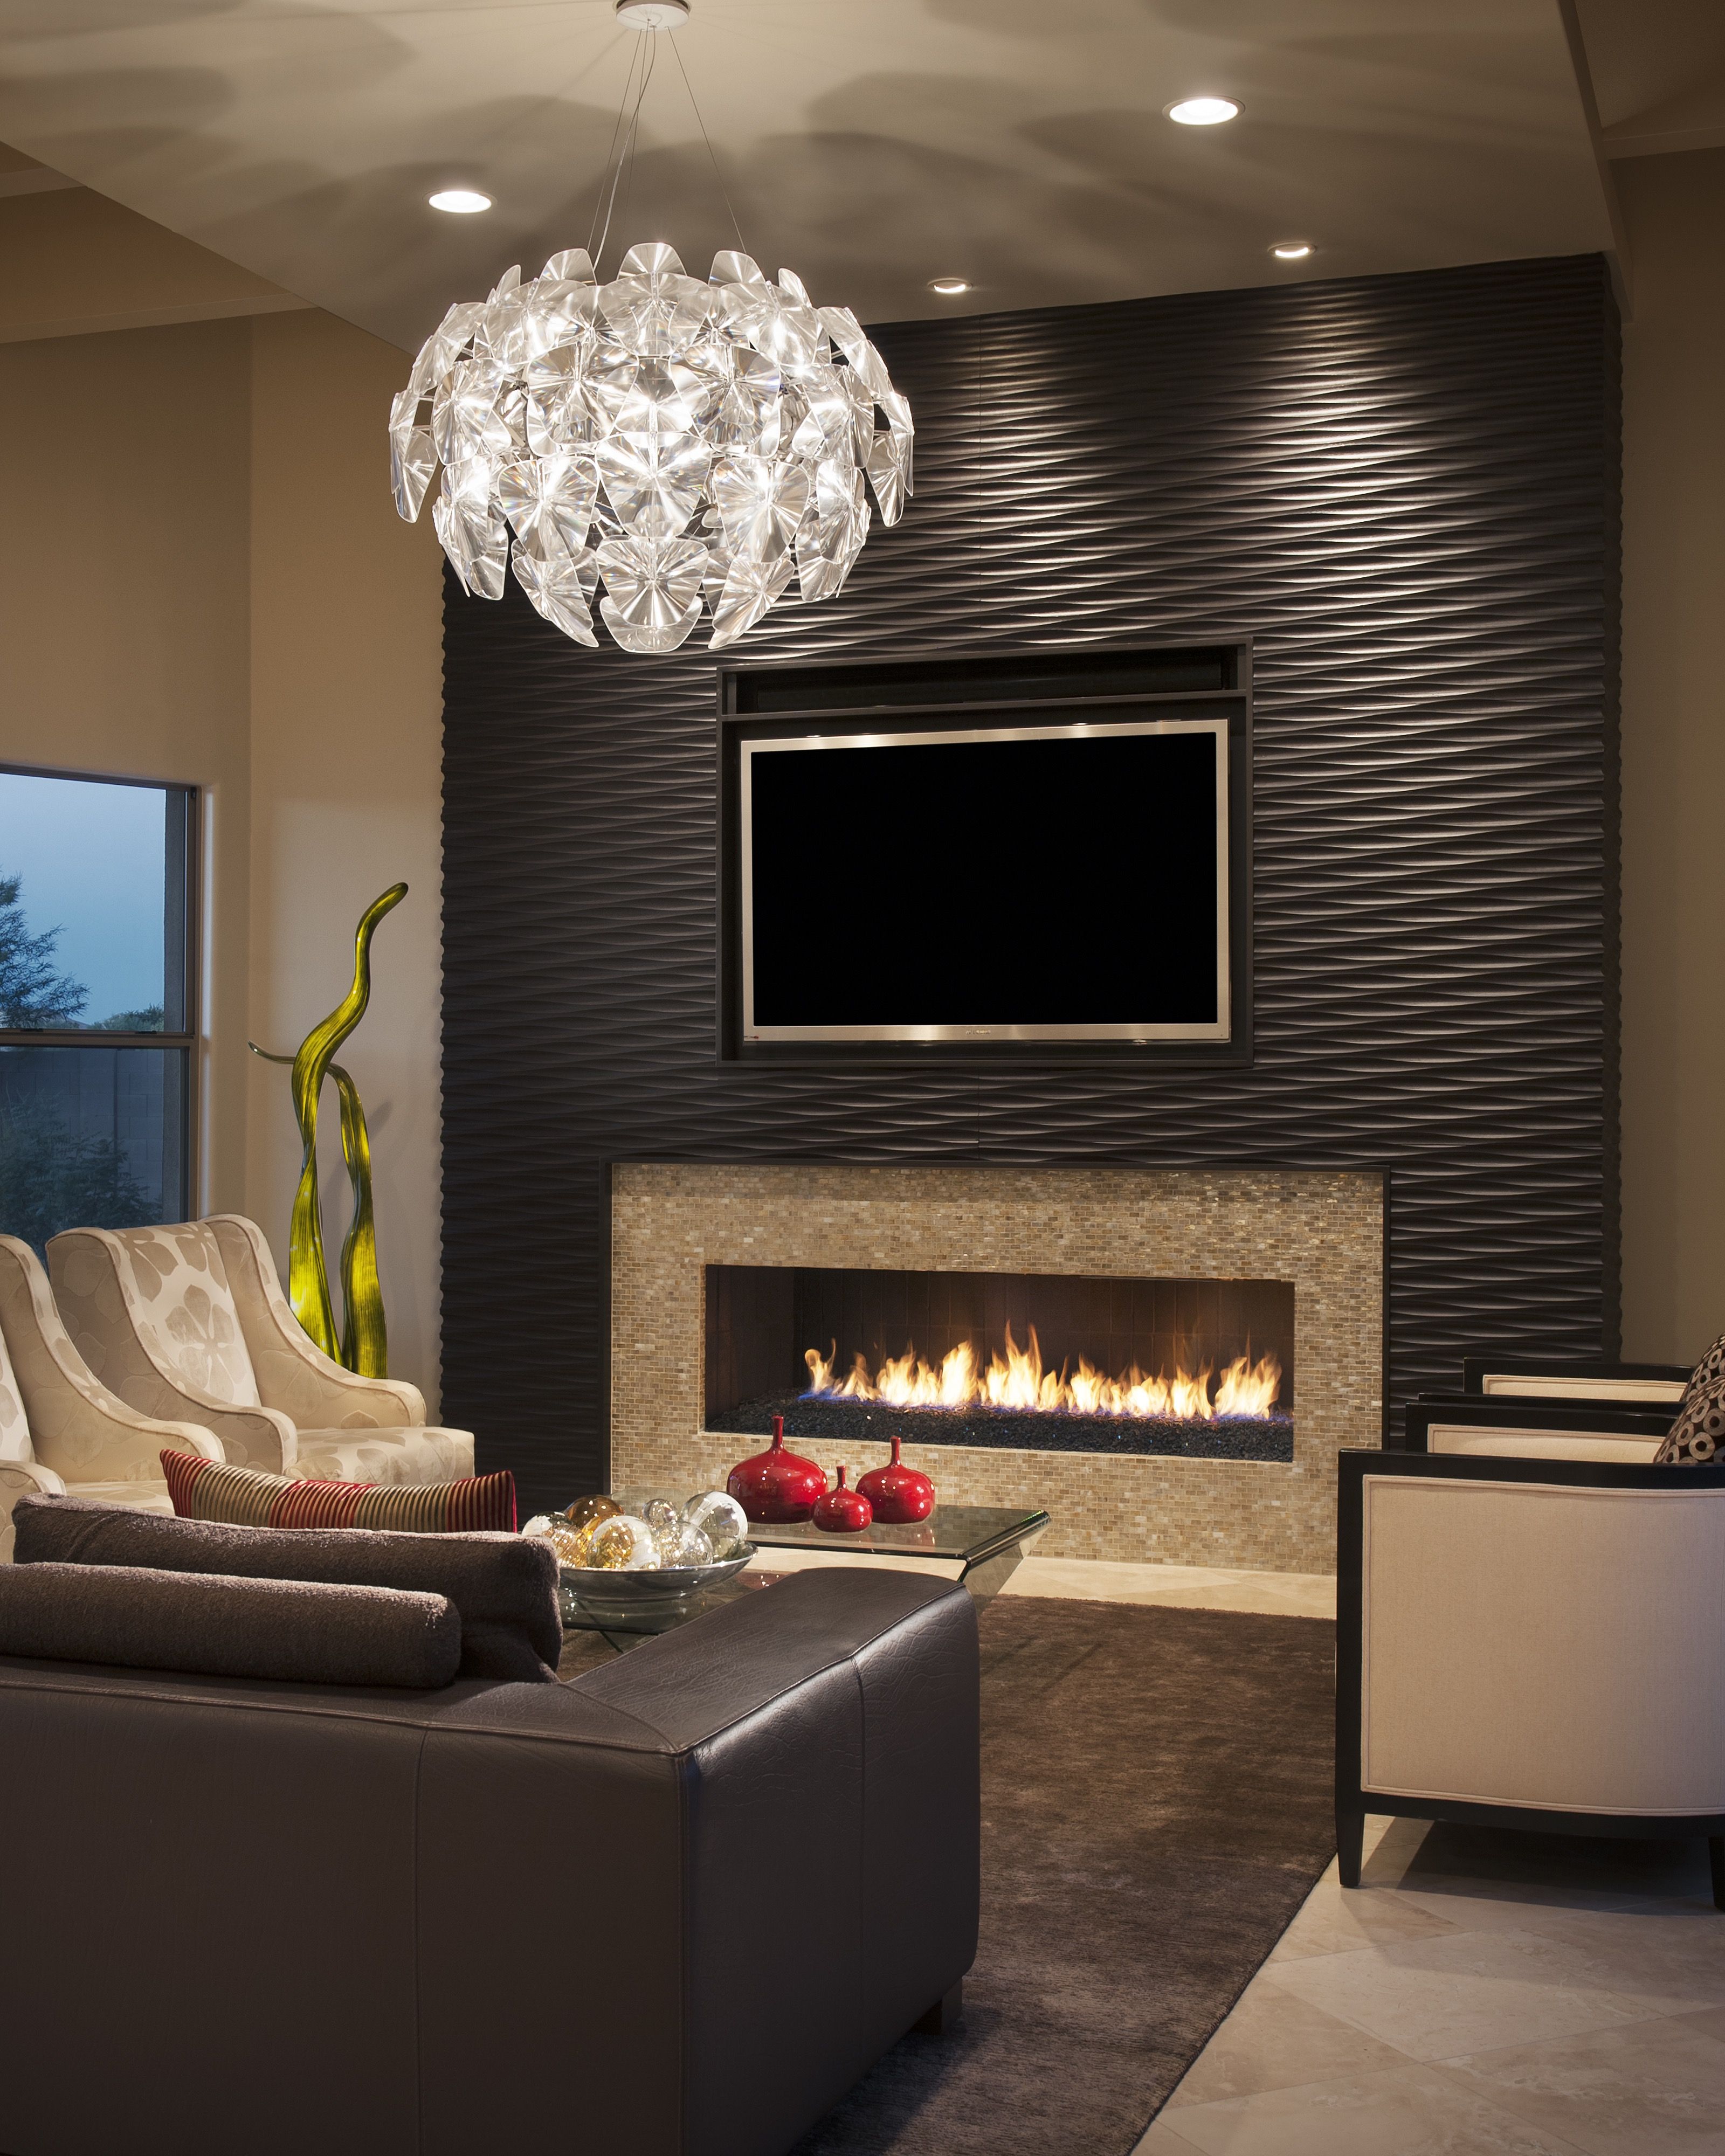 Glamour Living Room With Wood Clad Accent Wall And Modern Chandelier (View 2 of 18)